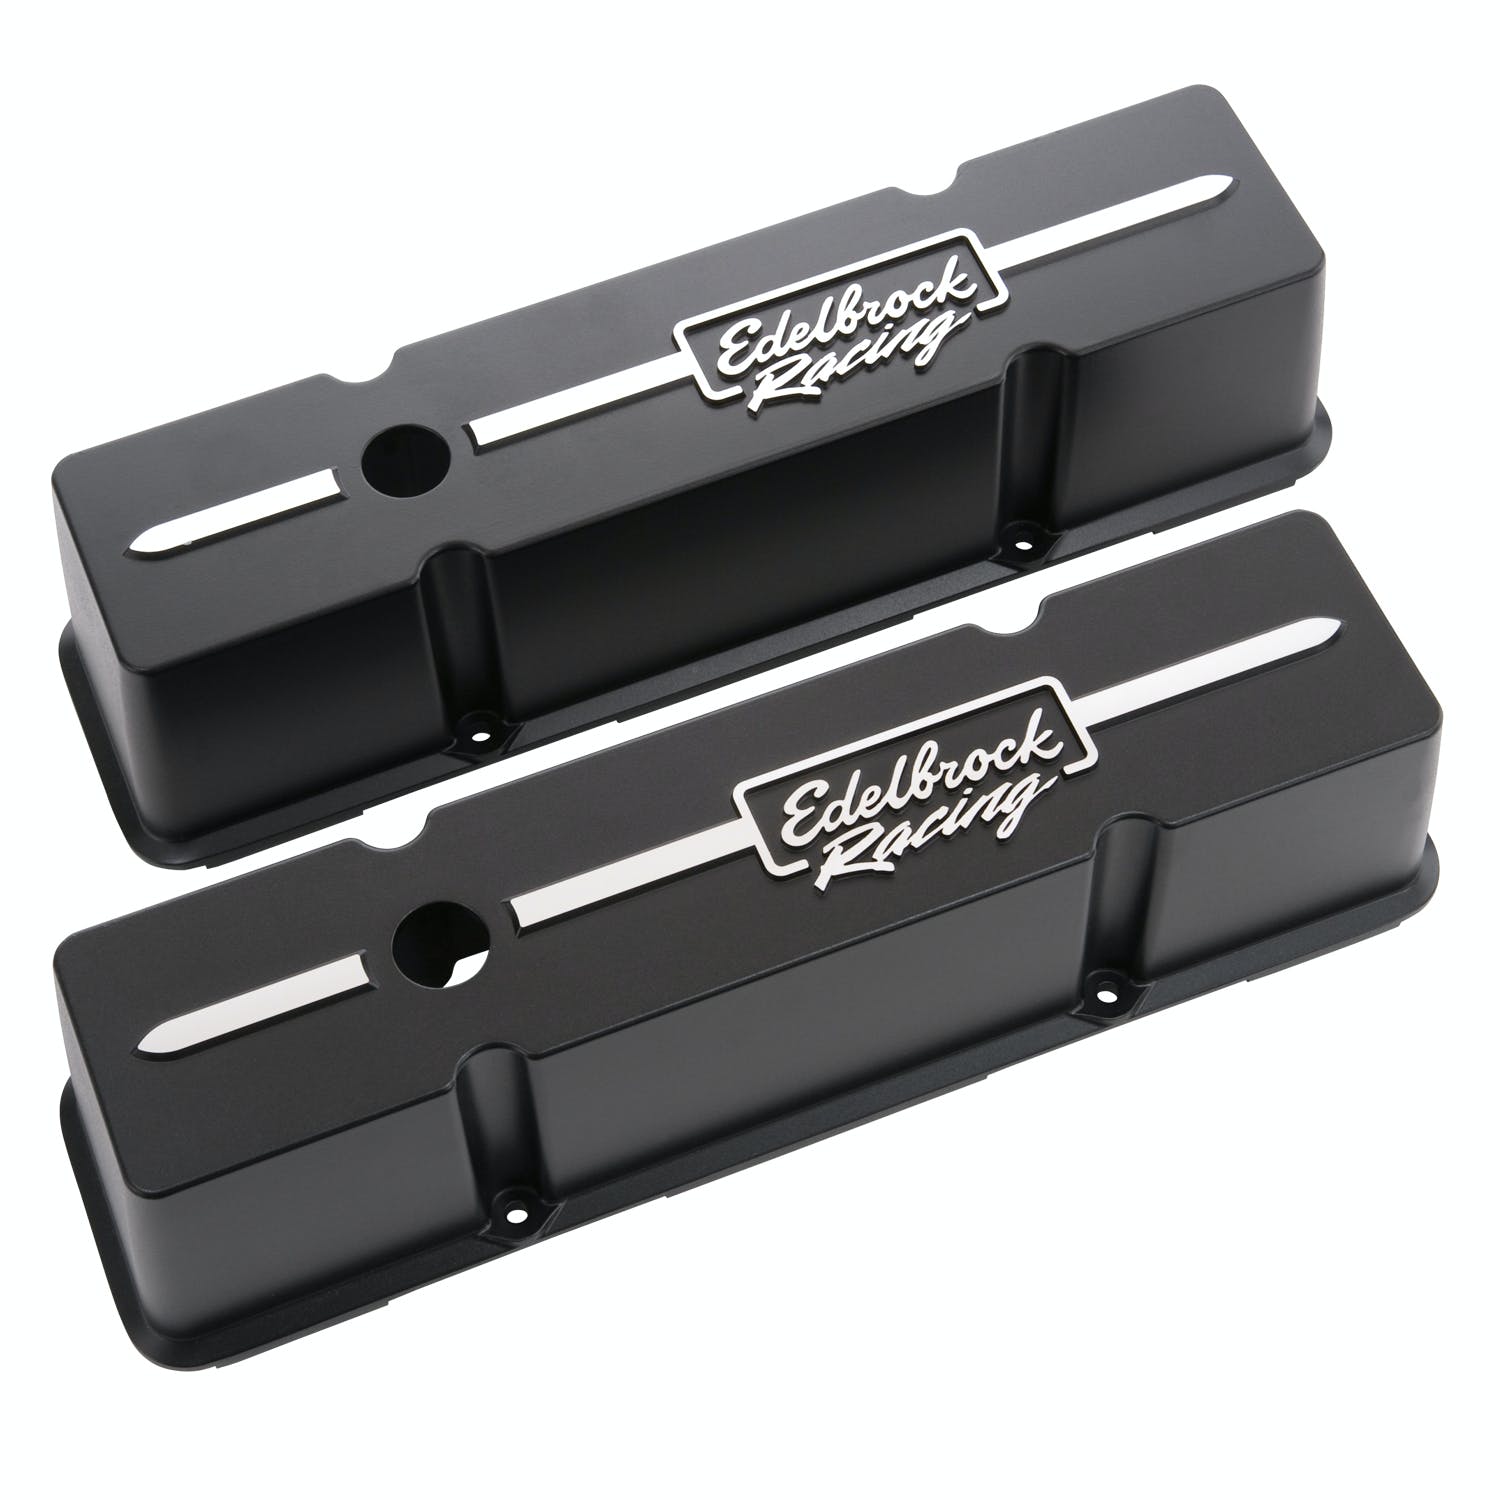 Edelbrock 41643 Racing Series Valve Covers for Chevy 262-400 V8 1959-86.